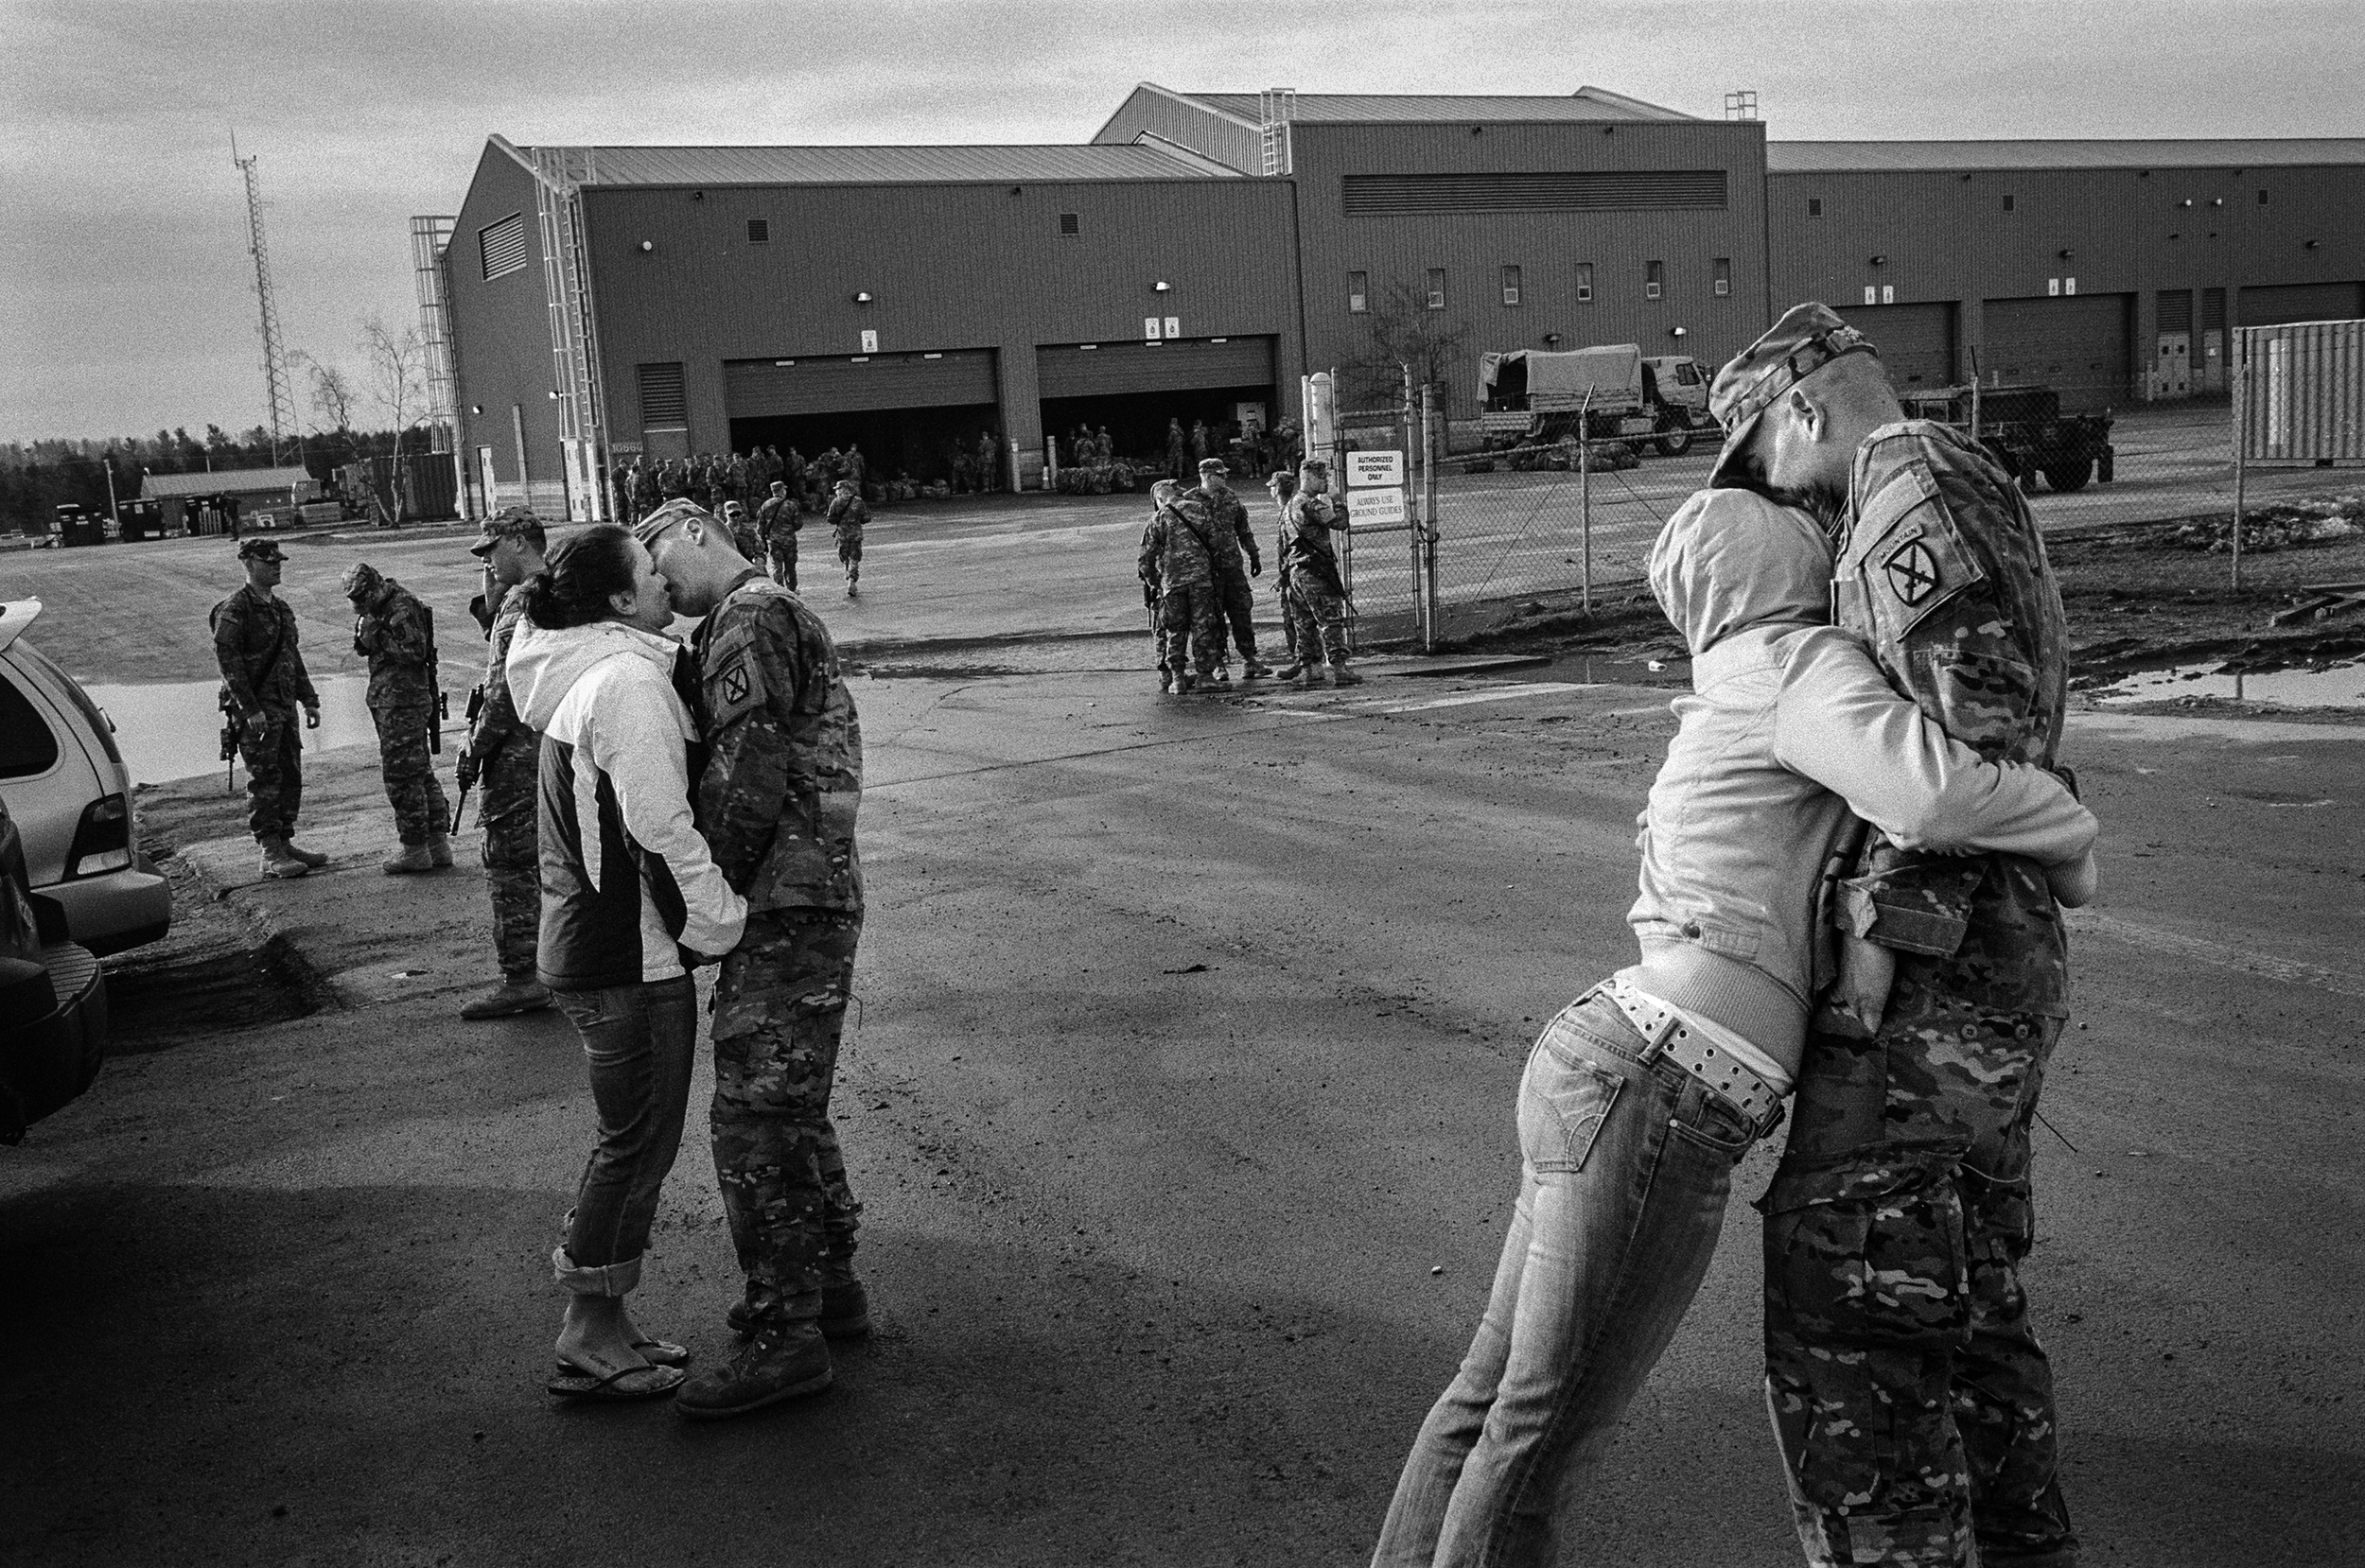  Soldiers say goodbye to their wives before deploying to Afghanistan at Fort Drum, New York,&nbsp;2011. 